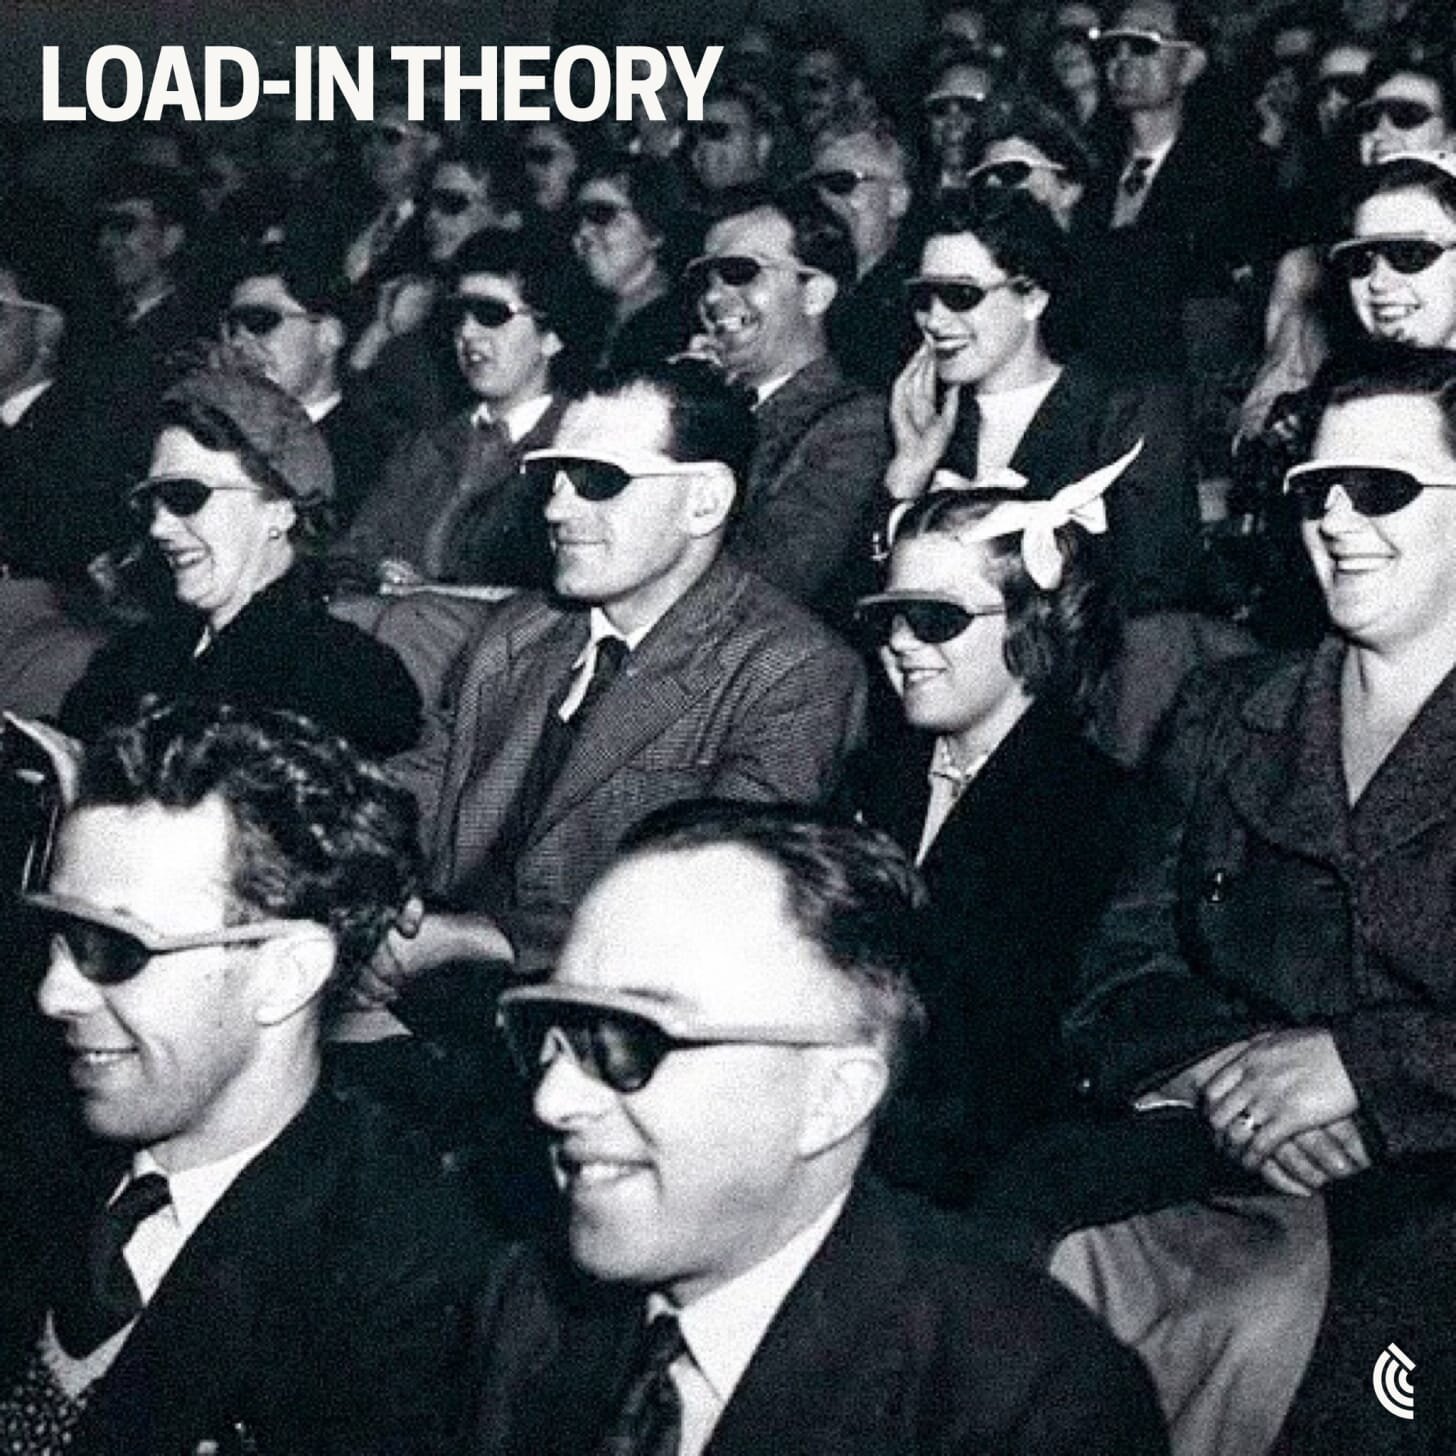 Load-In Theory by Joaquin Torres